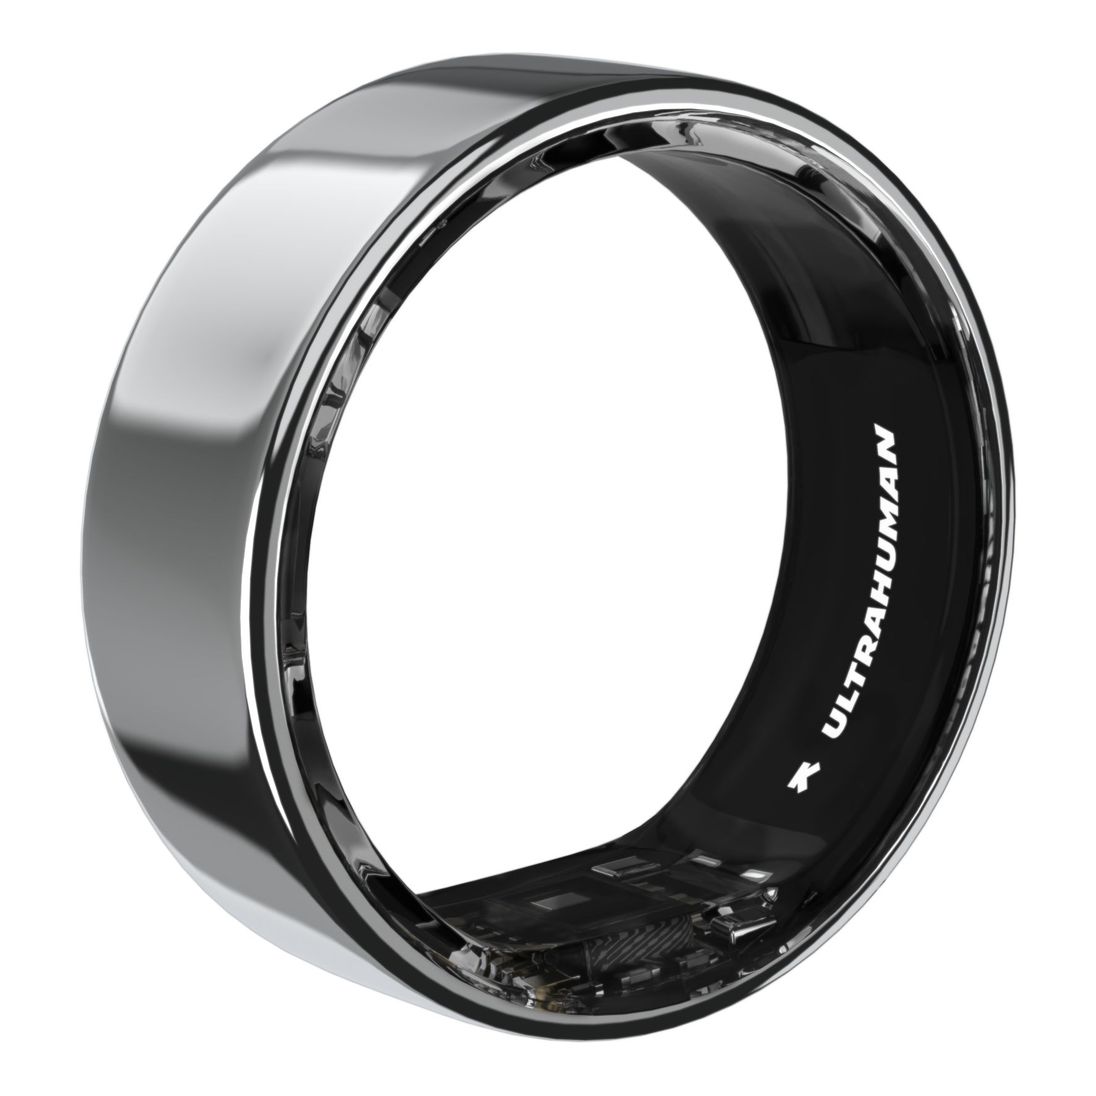 Ultrahuman Ring AIR Smart Ring - Size 14 - Space Silver